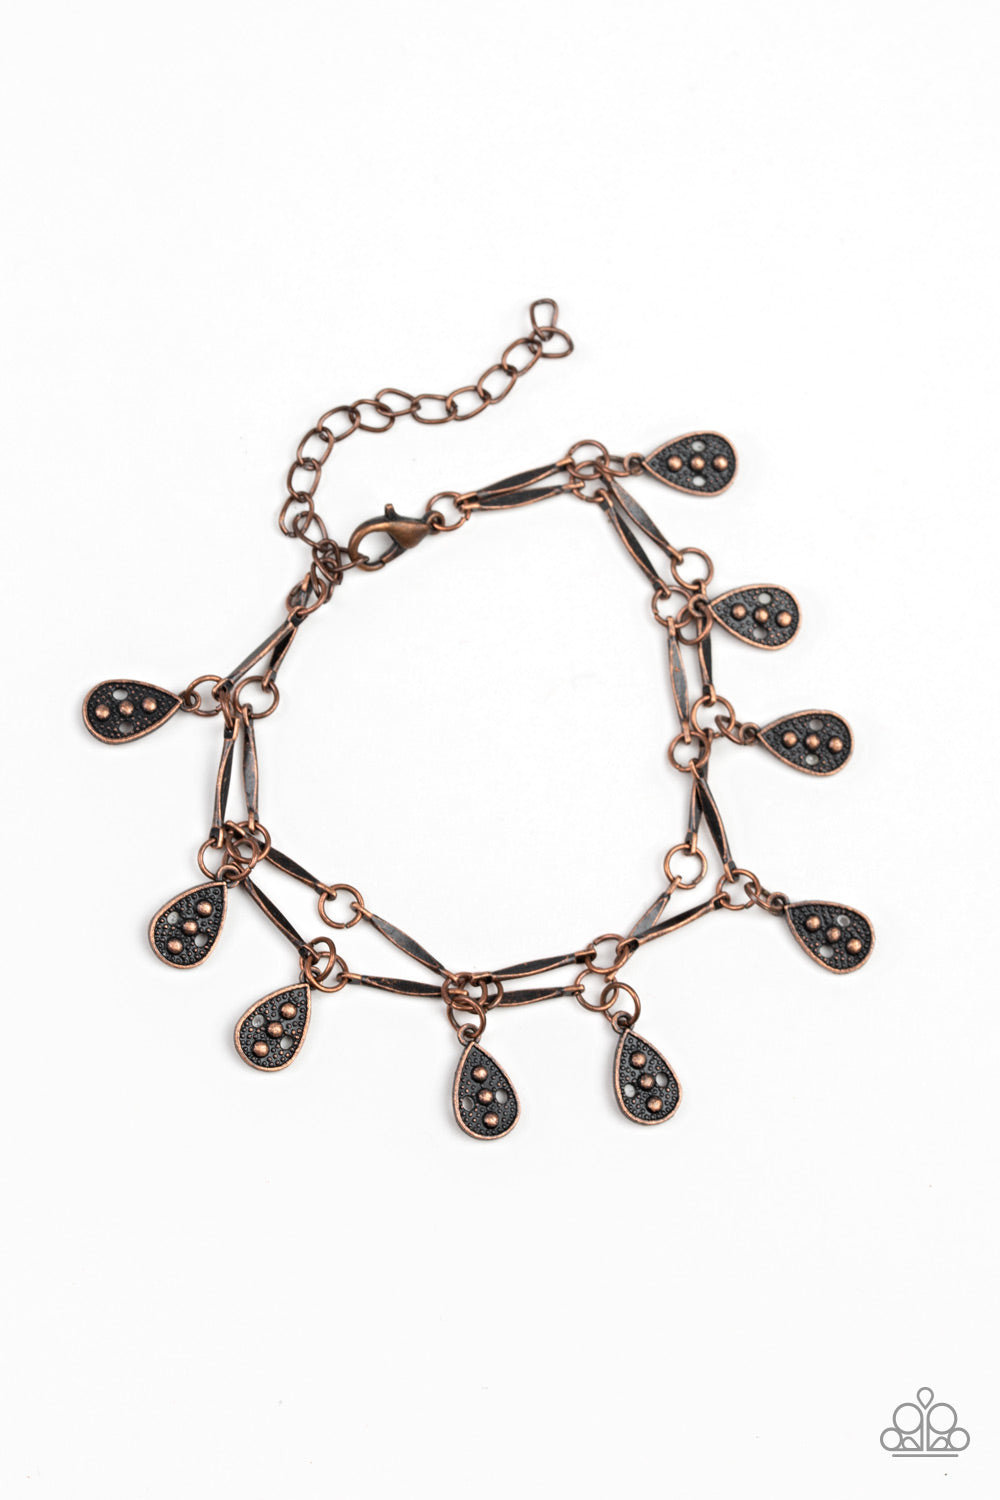 Paparazzi Accessories - Glistening copper rods and ornate teardrops link around the wrist in two rows, creating a playful fringe. Features an adjustable clasp closure.